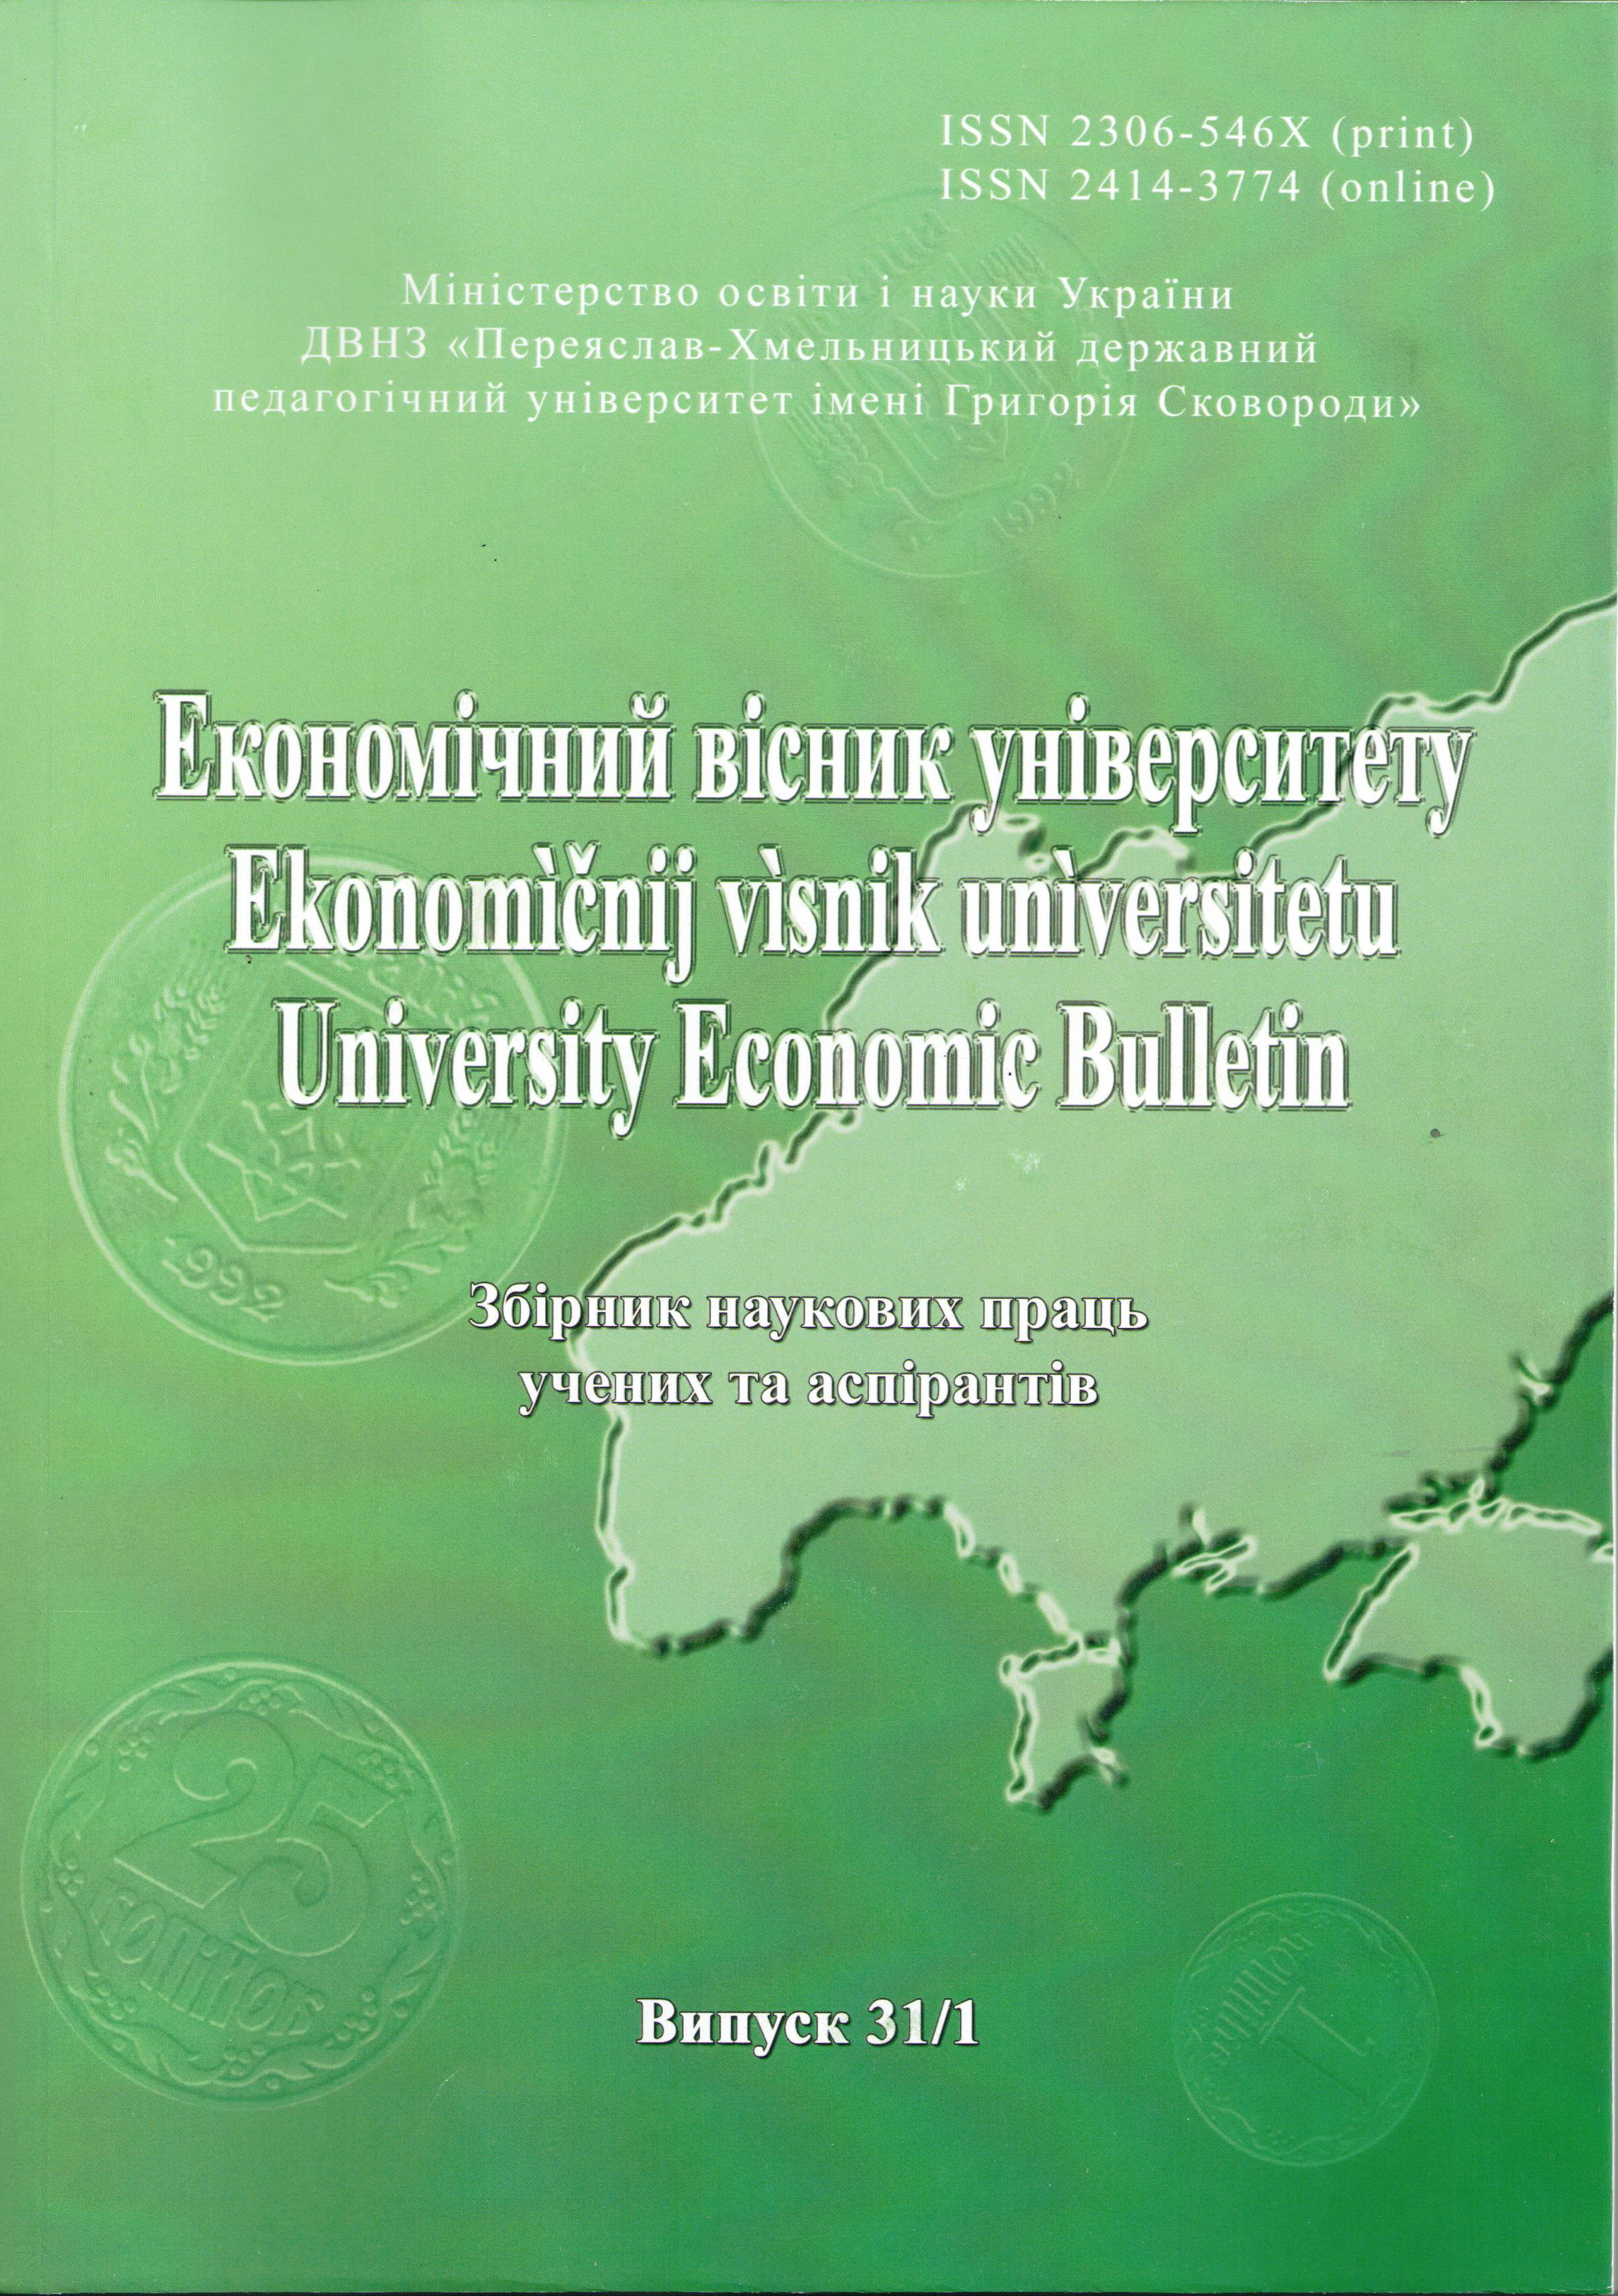 Analysis of receipts and expenditures of the state budget of Ukraine Cover Image